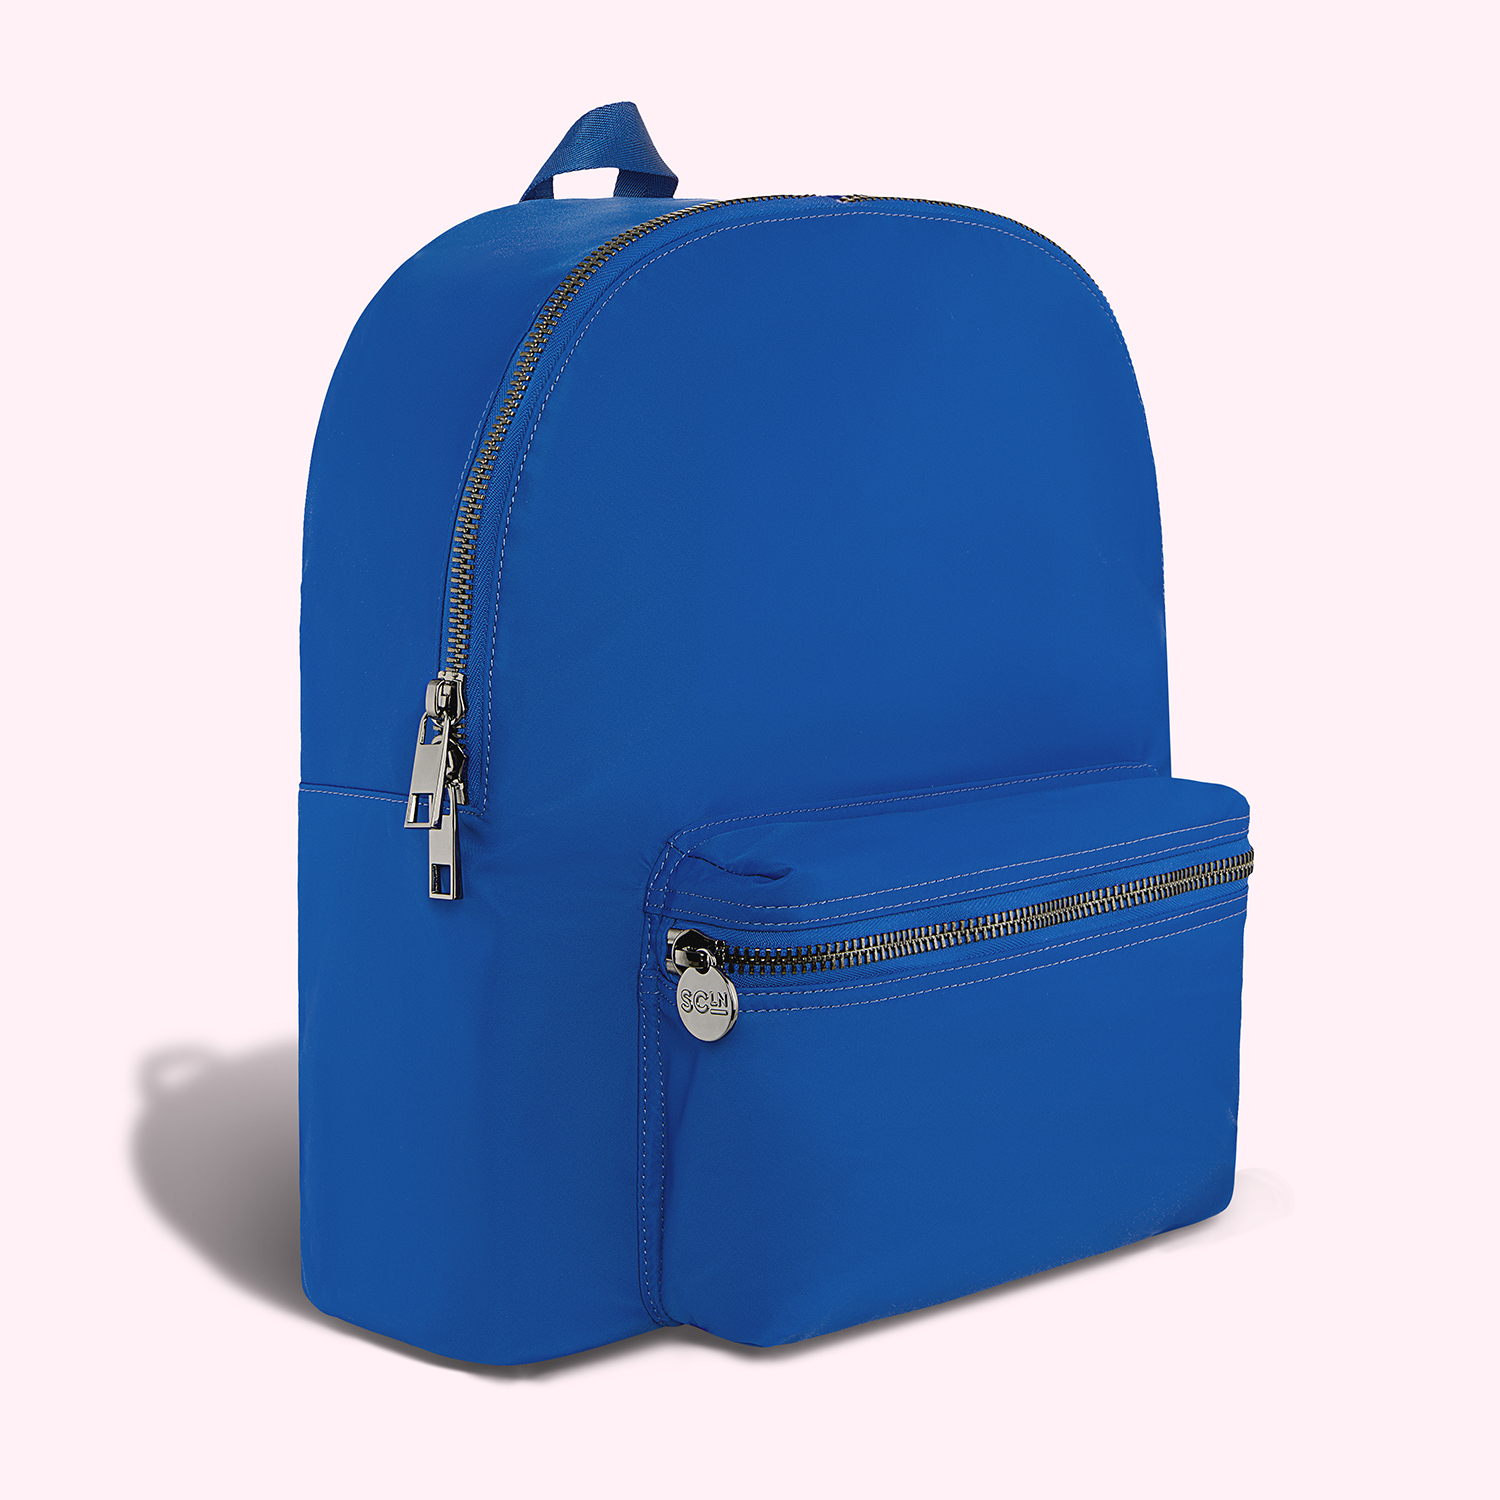 CLN - The perfect backpack for all the career women out